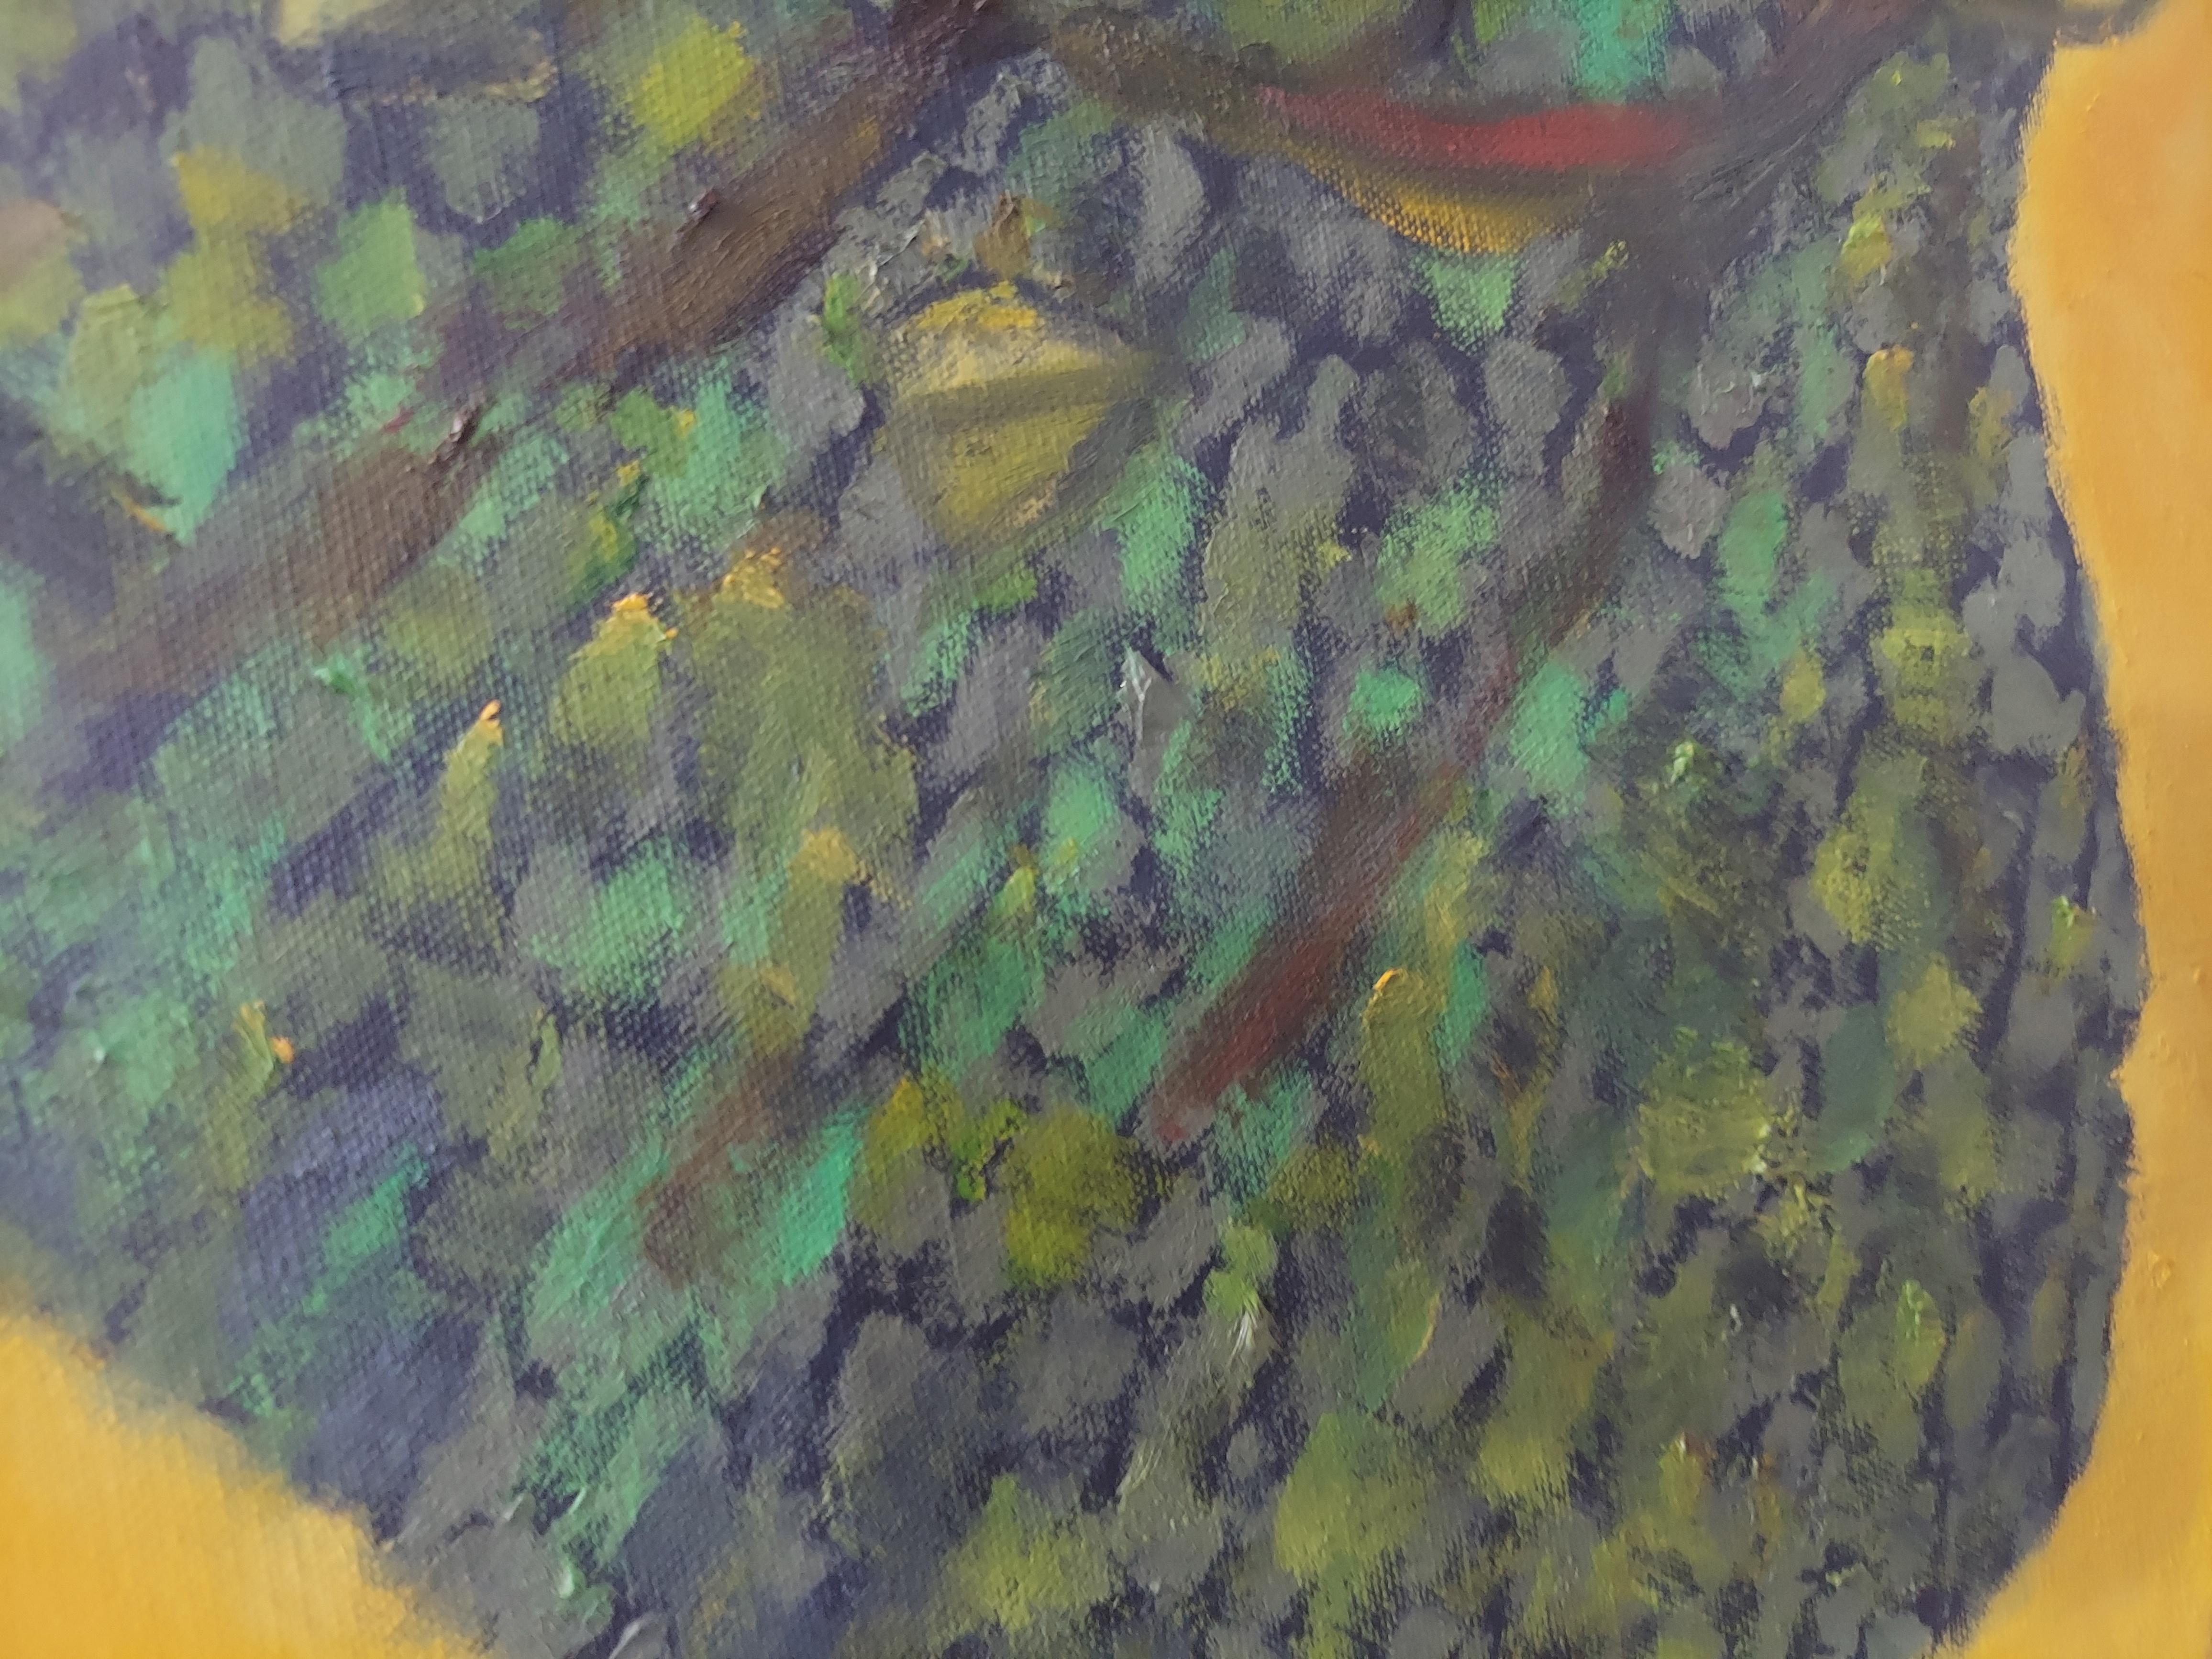 Resistance, strong female figure with trees warm green and yellow colors  - Feminist Painting by Stephen Basso